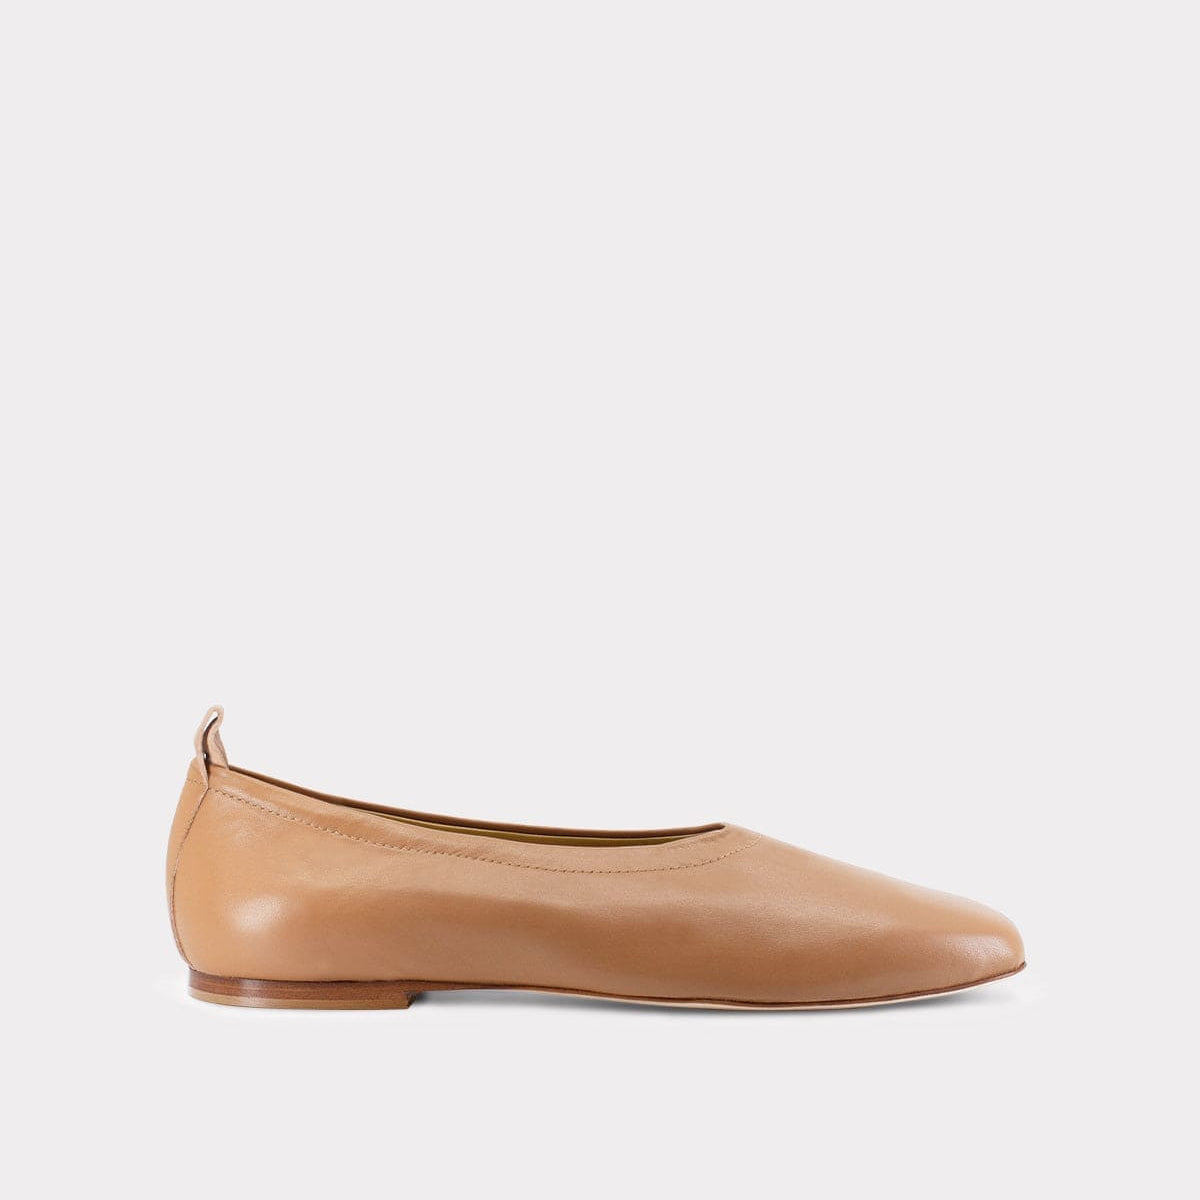 The Foundation Flat - Tan Flats | Handcrafted Leather Flats– ESSĒN